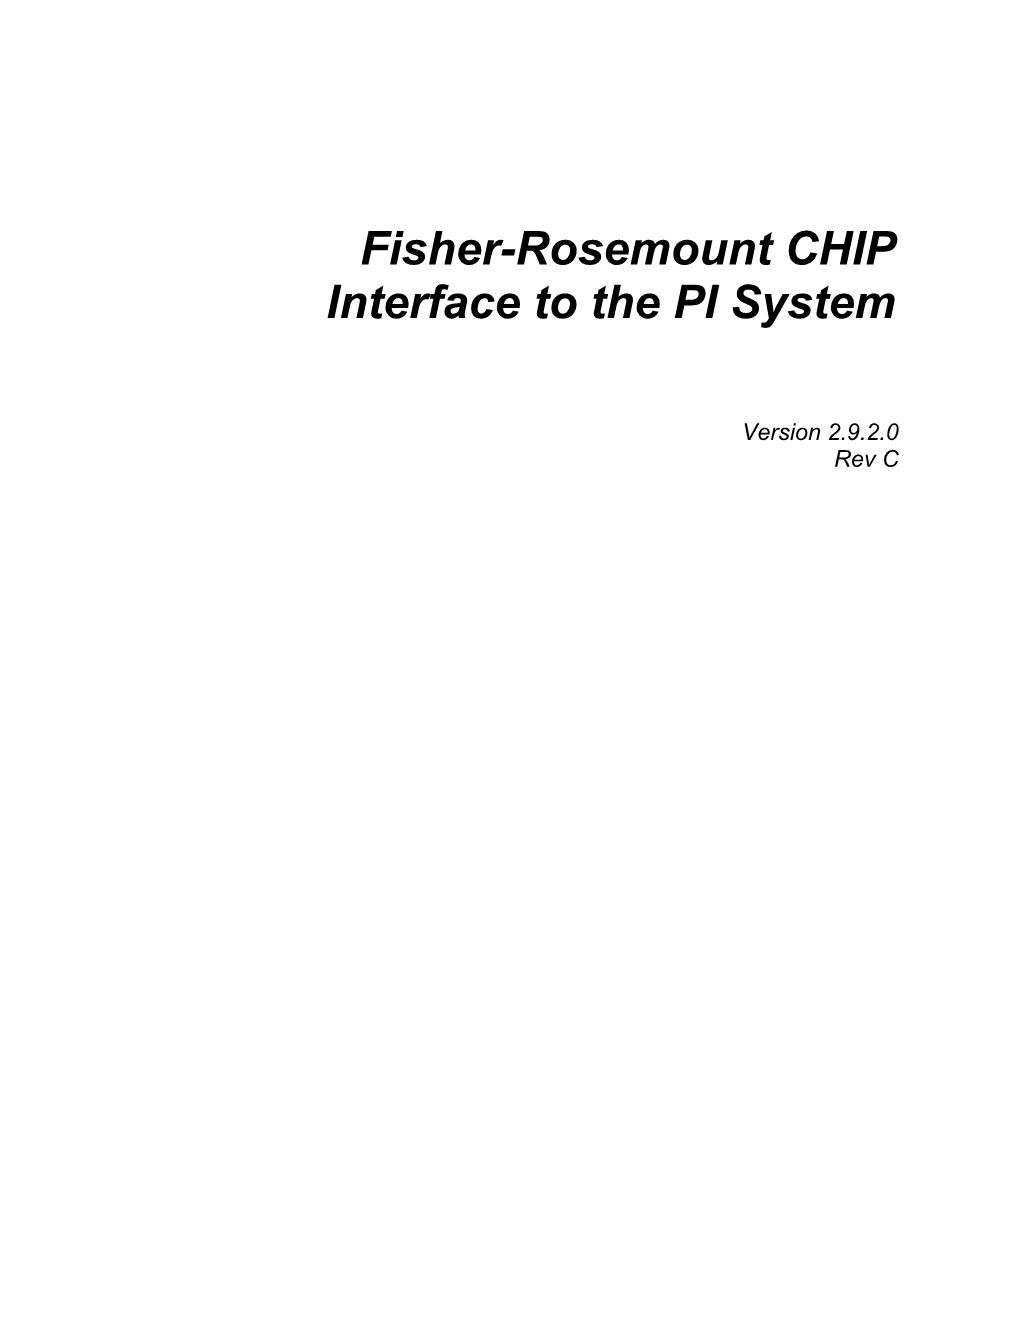 Fisher-Rosemount CHIP Interface to the PI System